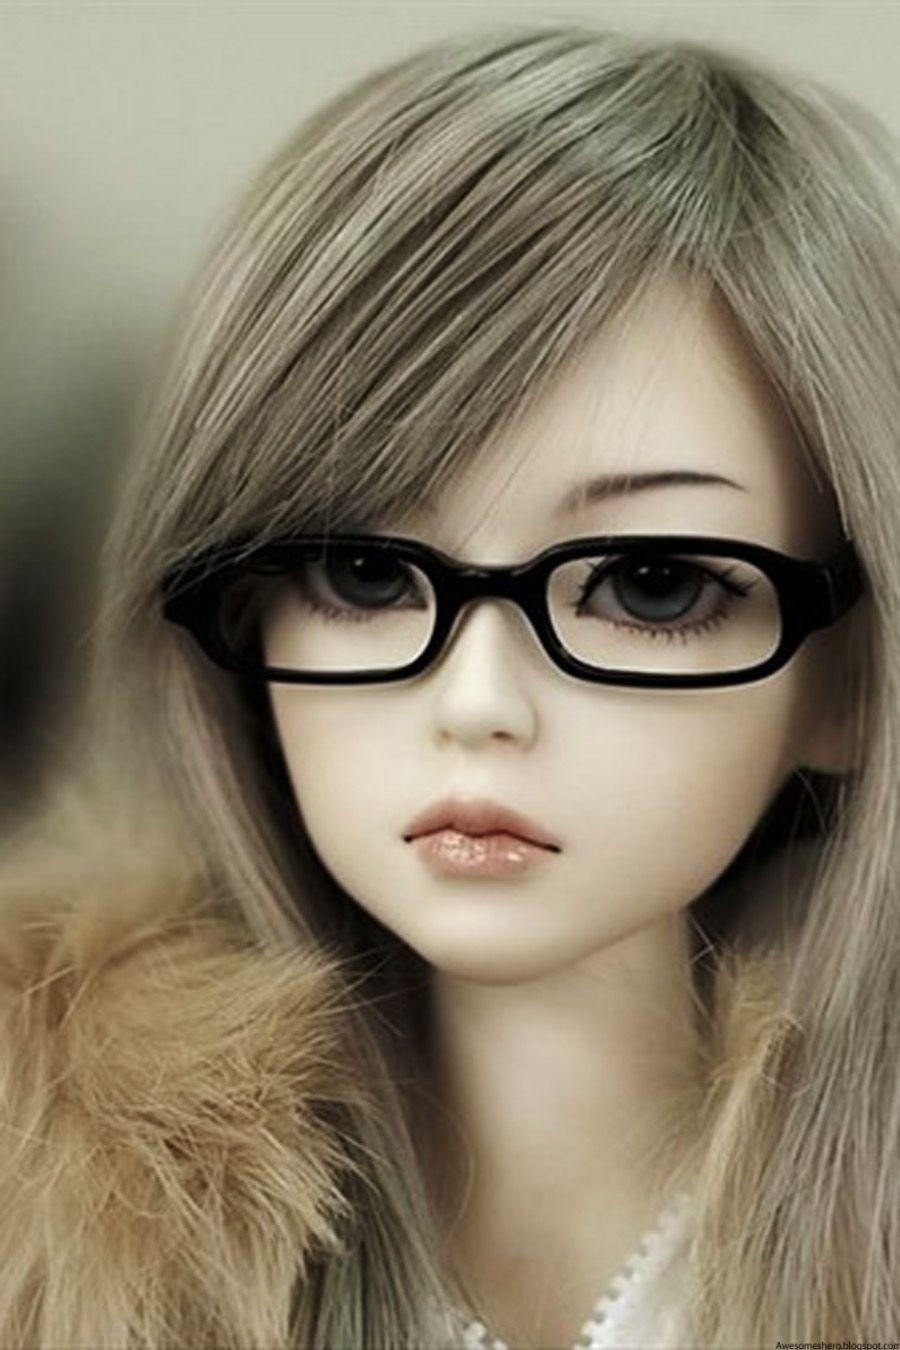 Barbie Doll Wallpapers - Top Free Barbie Doll Backgrounds ...